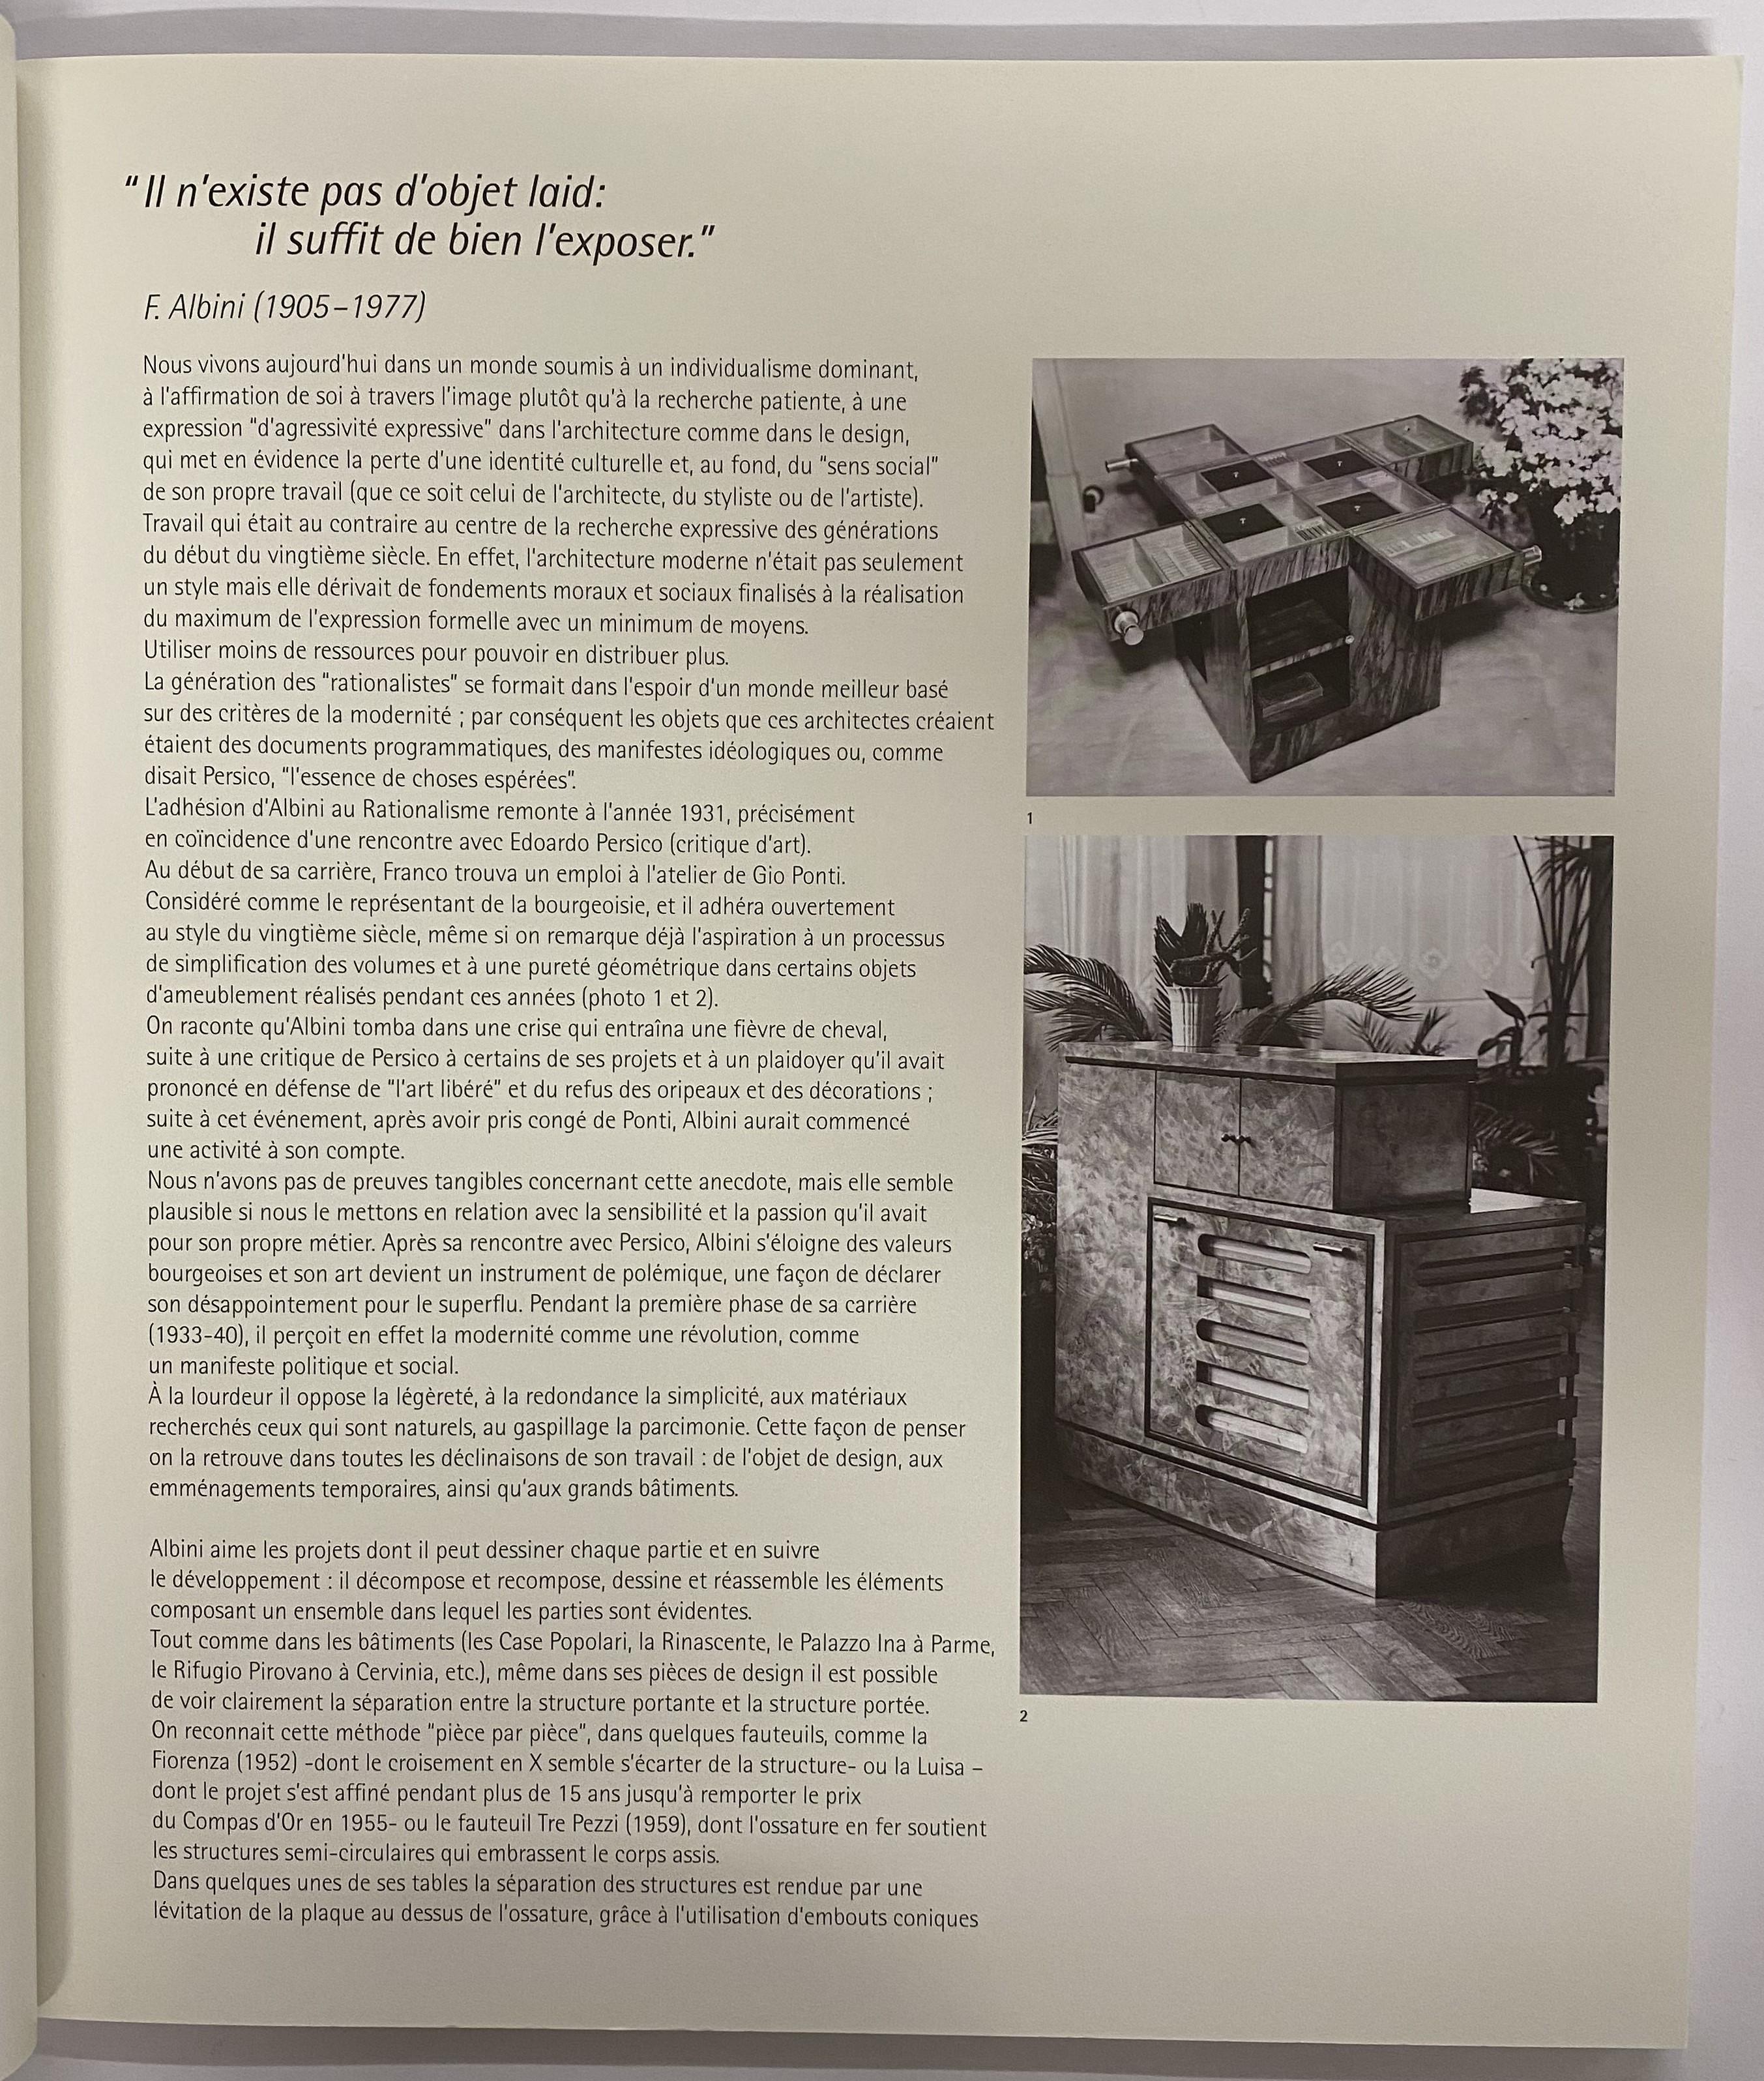 Catalogue of the exhibition dedicated to the creations (armchairs, desks, shelves, lighting, etc.) of Franco Albini, Italian architect and designer (1905-1977).
Galerie du Passage (Paris), Galerie Nilufar (Milan), 5 April-7 May 2011. Text in English